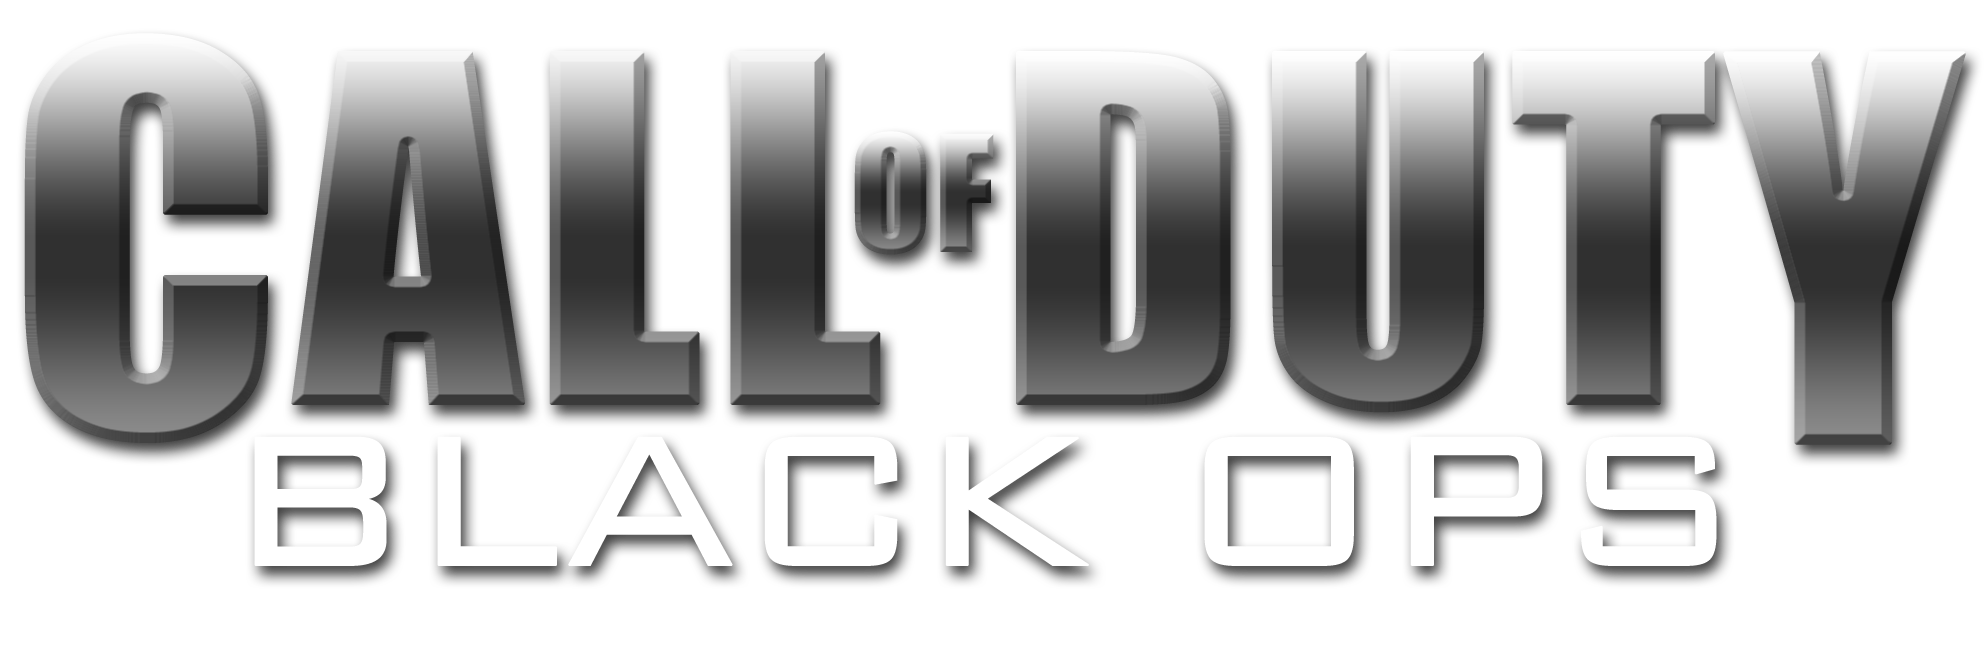 Call of Duty Black ops PNG Image Transparente image